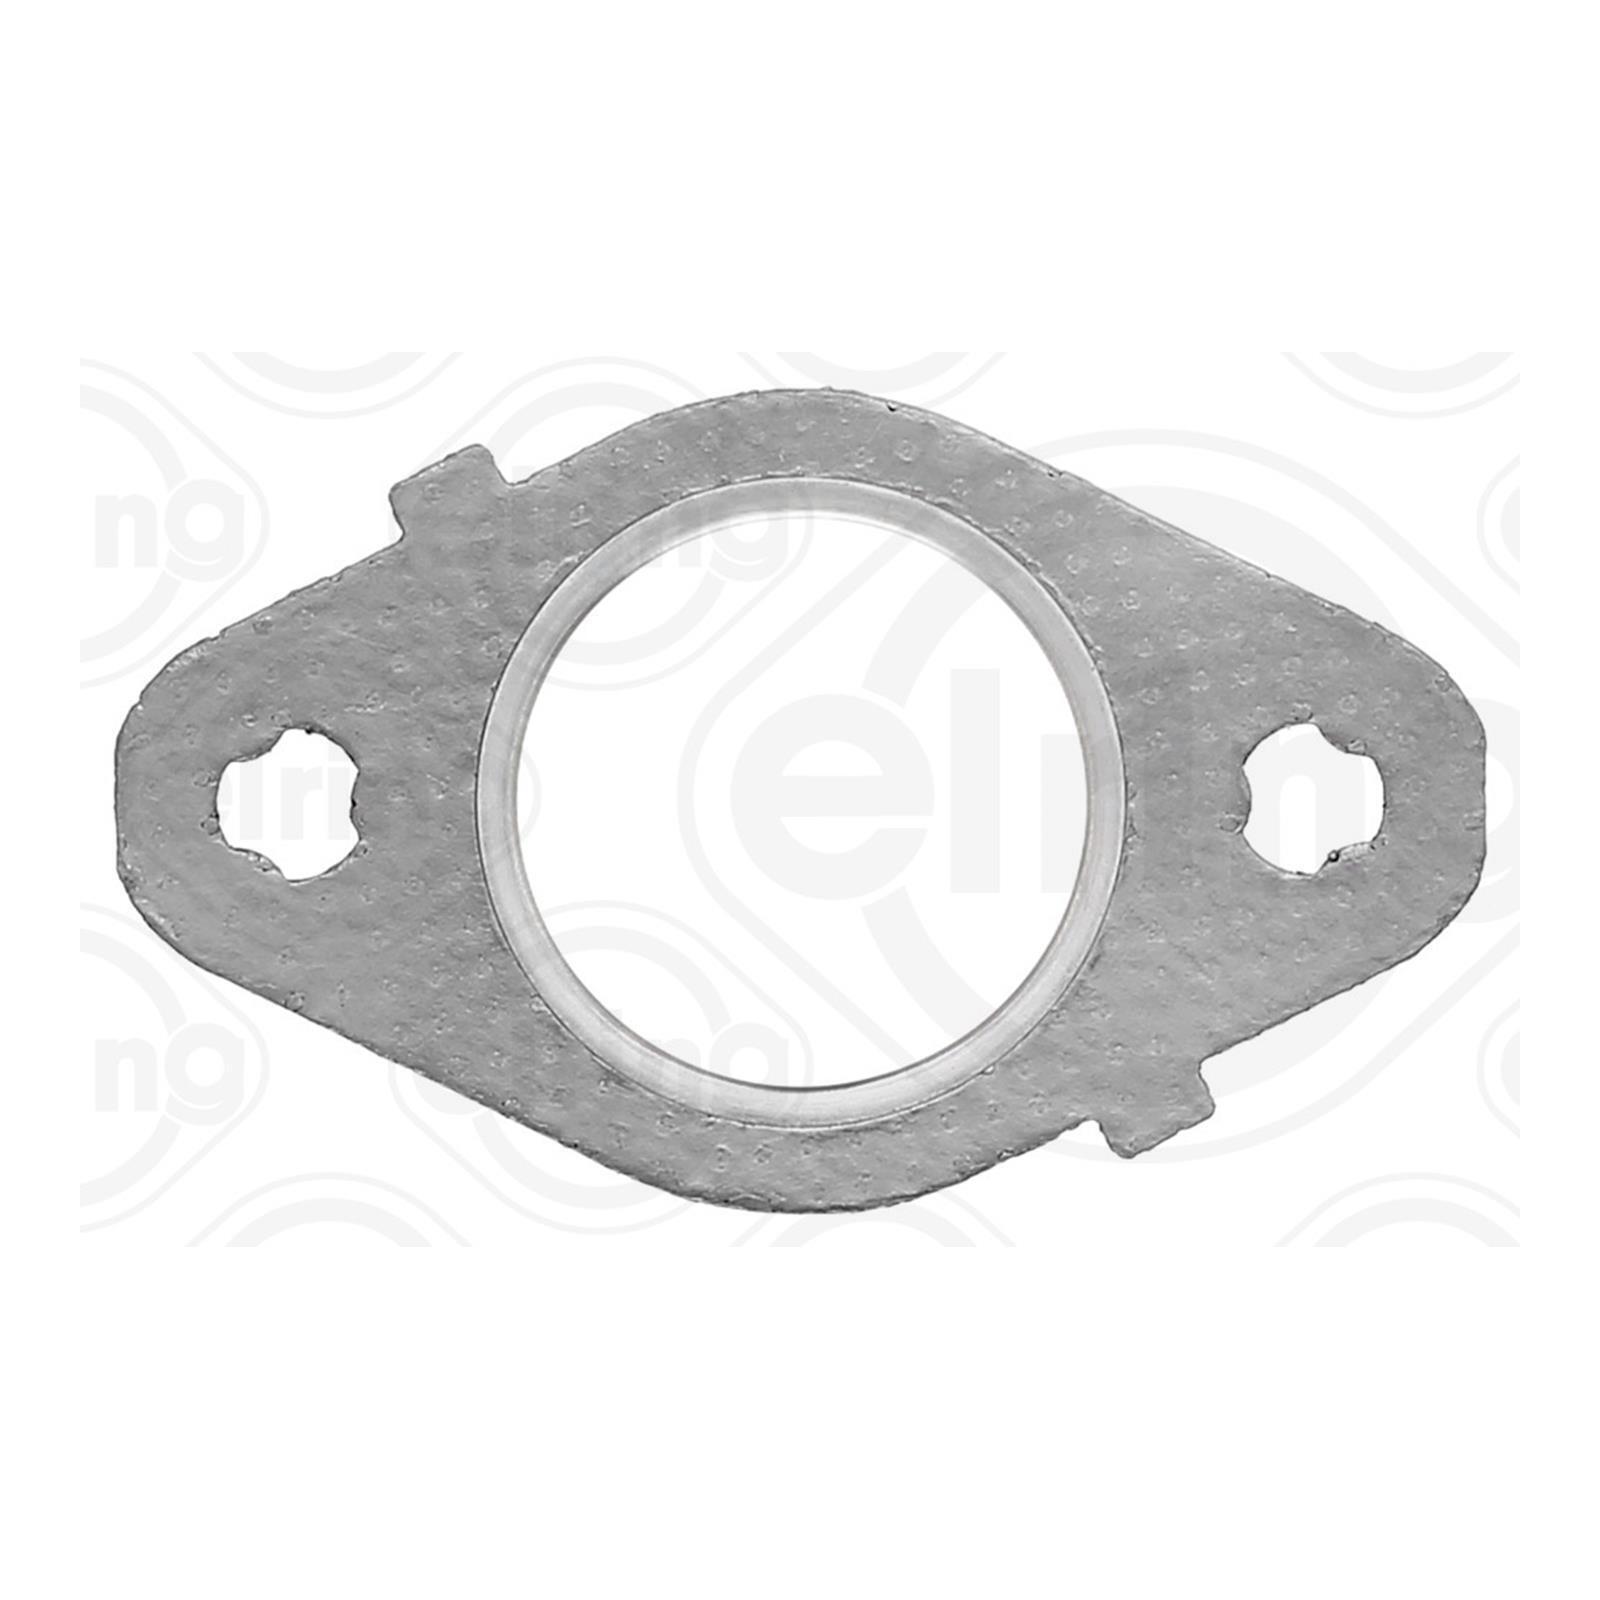 ELRING Exhaust Manifold Seal Gasket 933.350 MK1 FOR C20 Astra C10 Chairman Corsa